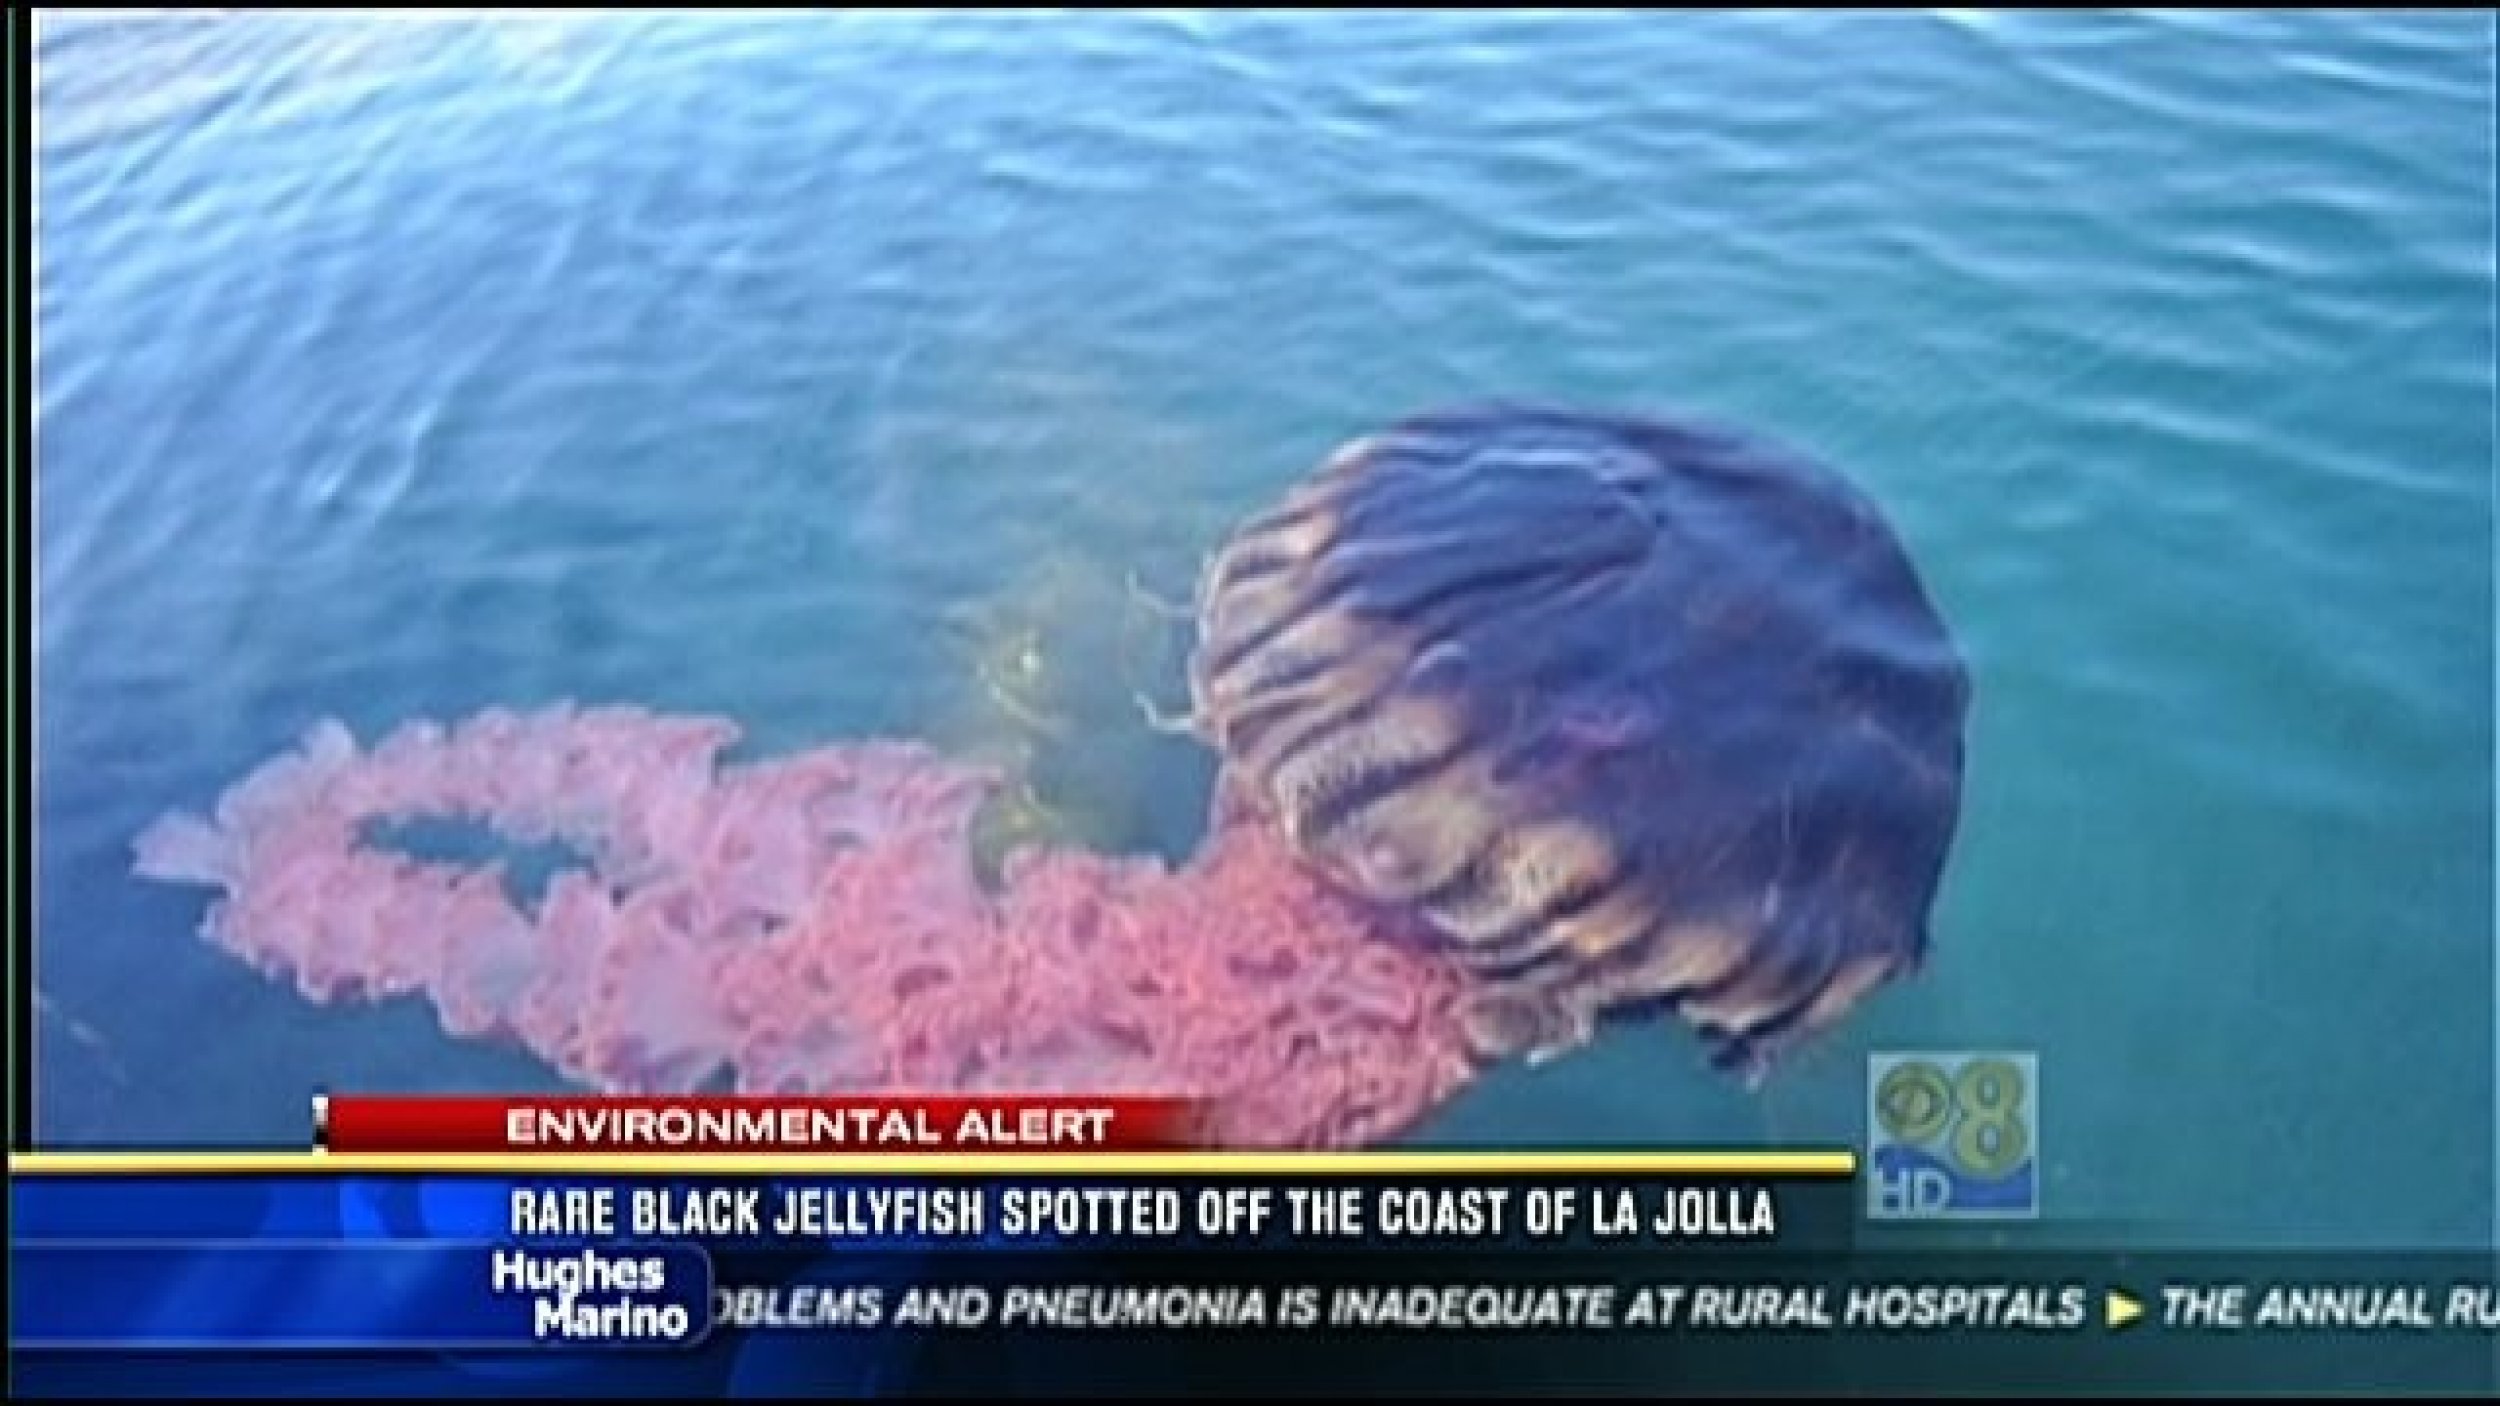 A rare black jellyfish was found off the coast of La Jolla in San Diego by a kayaker